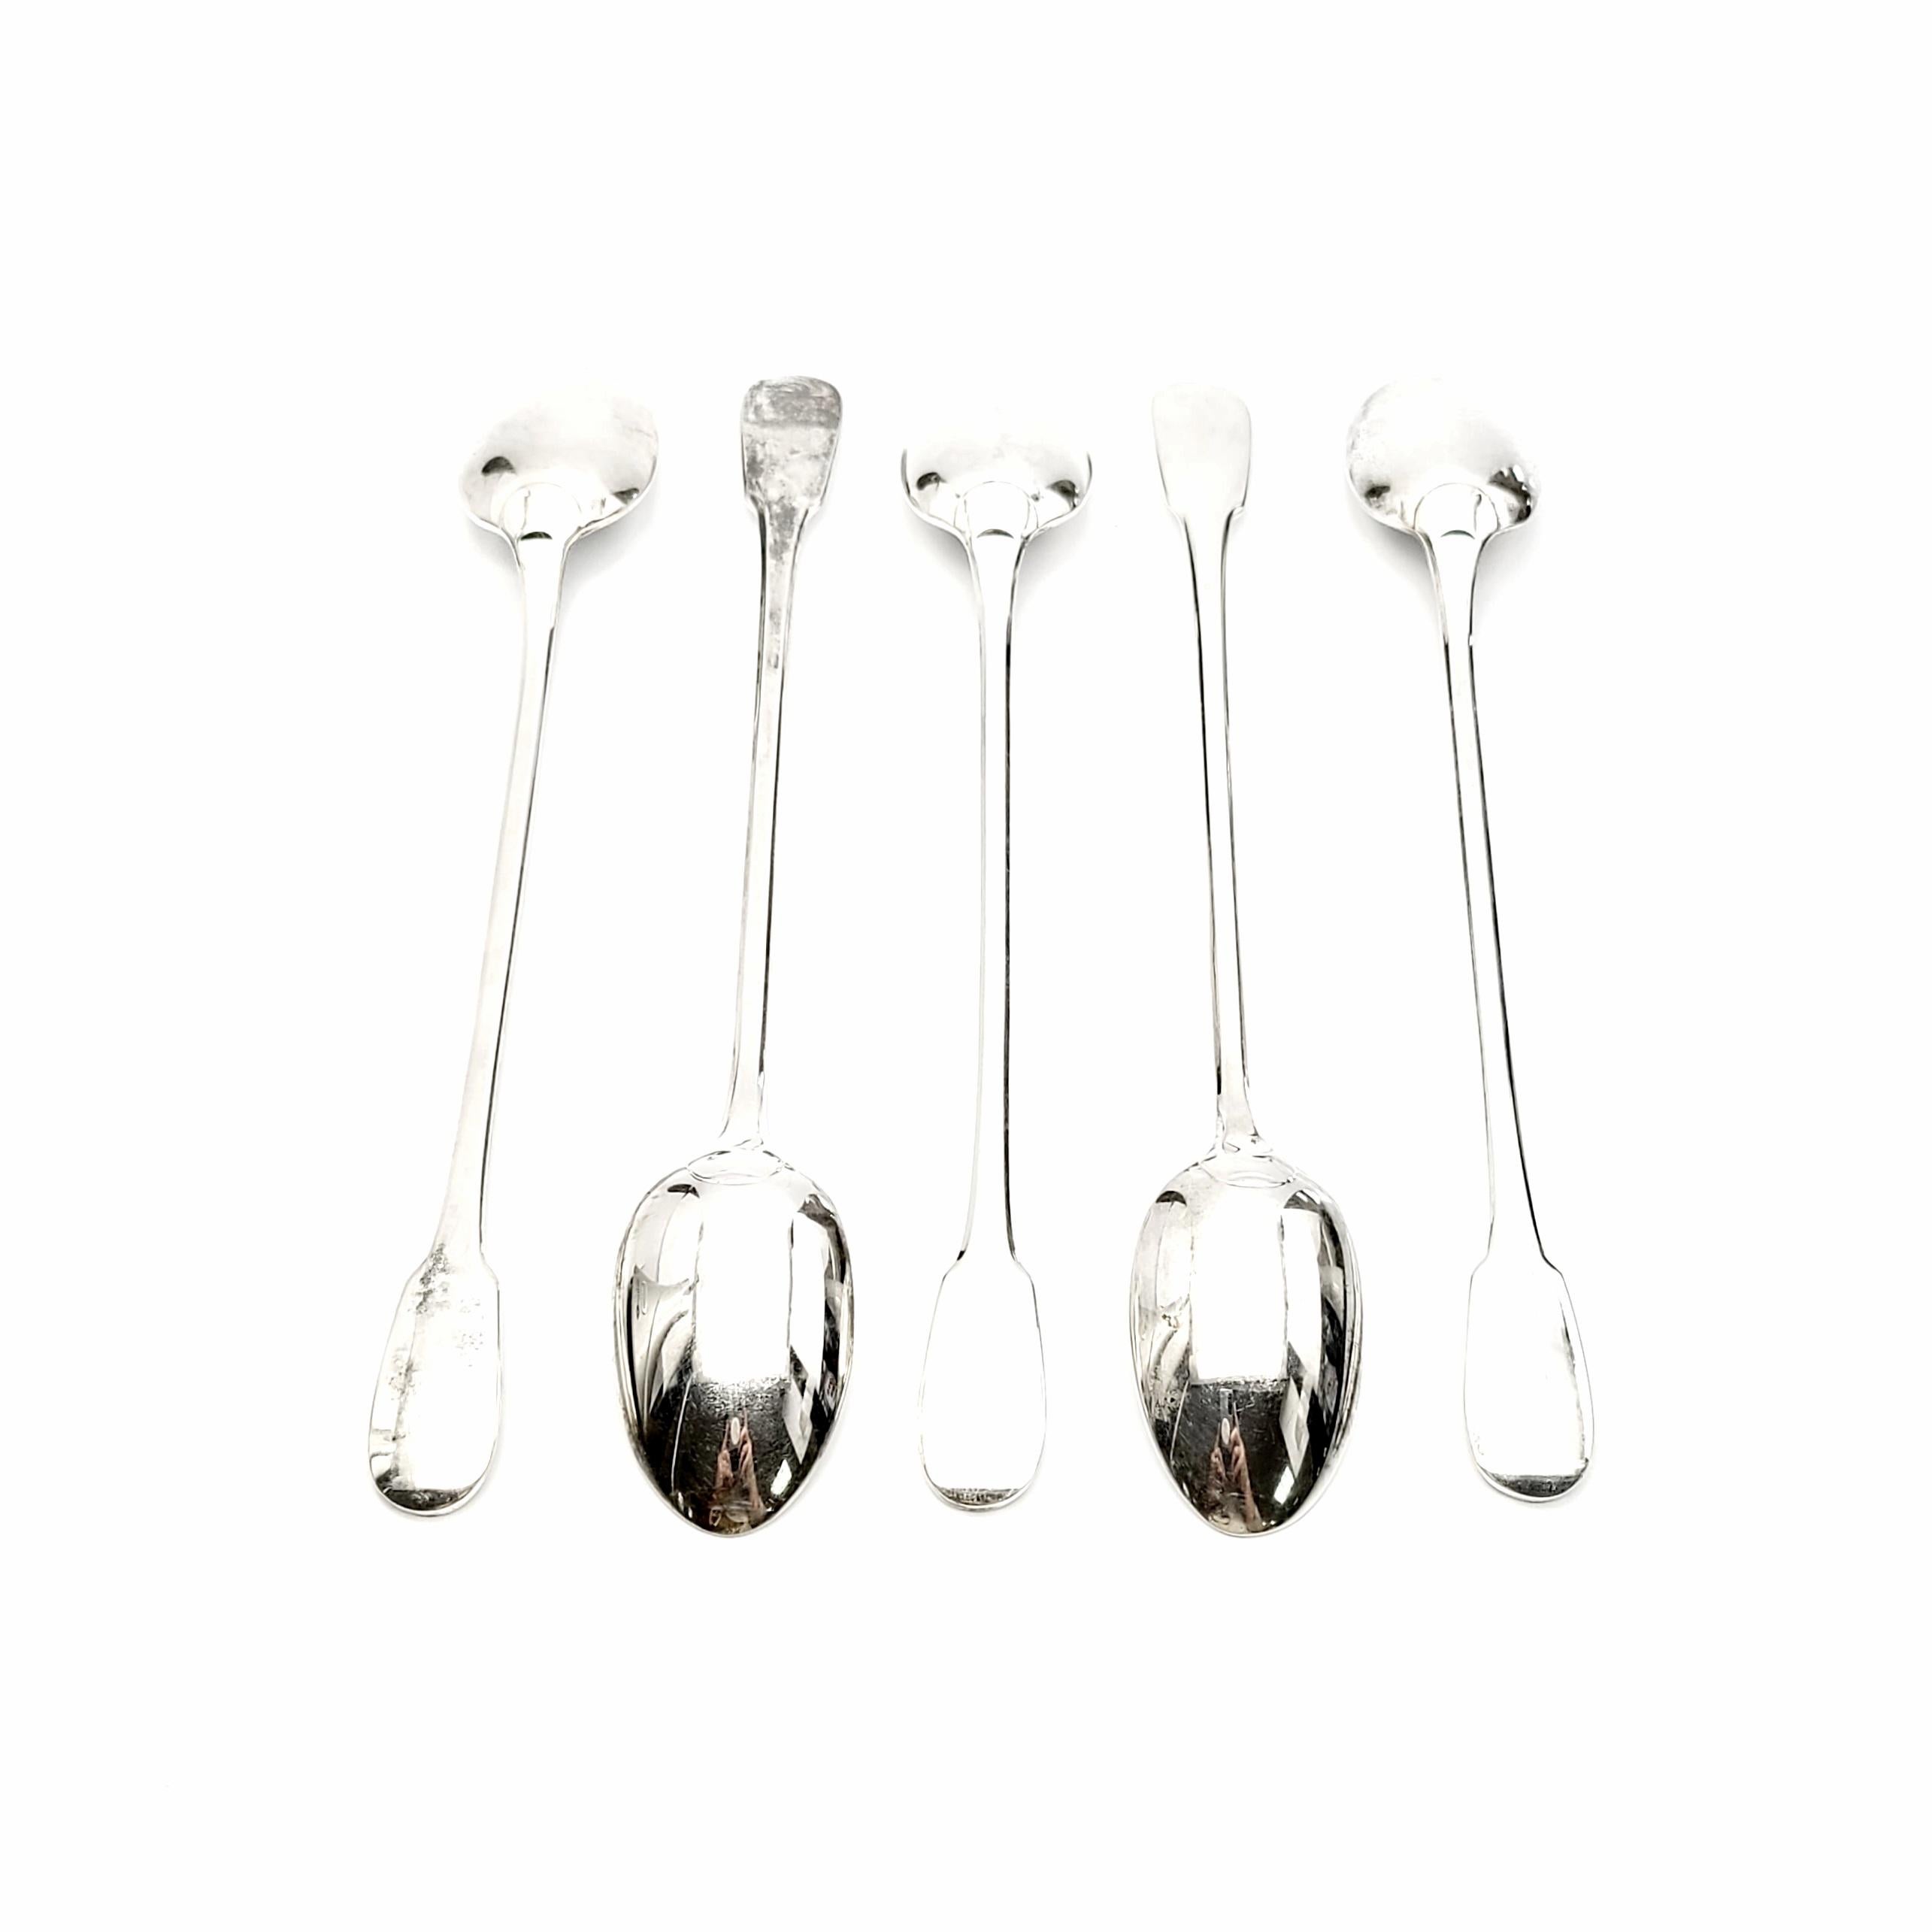 Set of 5 vintage silver plate iced tea spoons in the Cluny pattern by Christofle.

The Cluny pattern is a simple and elegant design named for the medieval abbey.

Measures 7 5/8